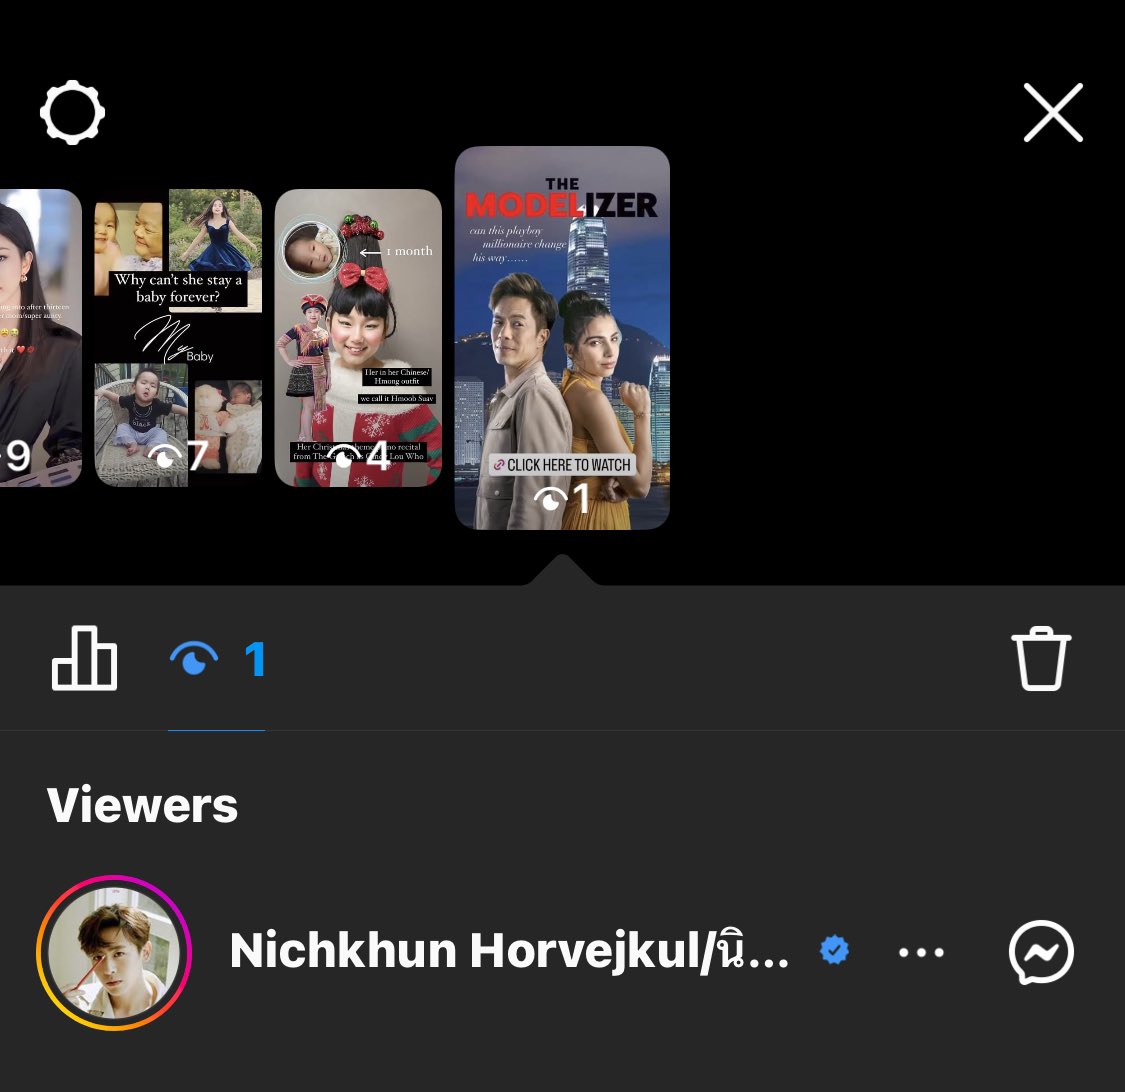 #Kpop sensation #NICHKHUN of #2PM checked out my IG story 🫶. Wohoo 🥳, then again it’s because I’m sharing their film. 

#TheModelizer #TheModelizerMovie